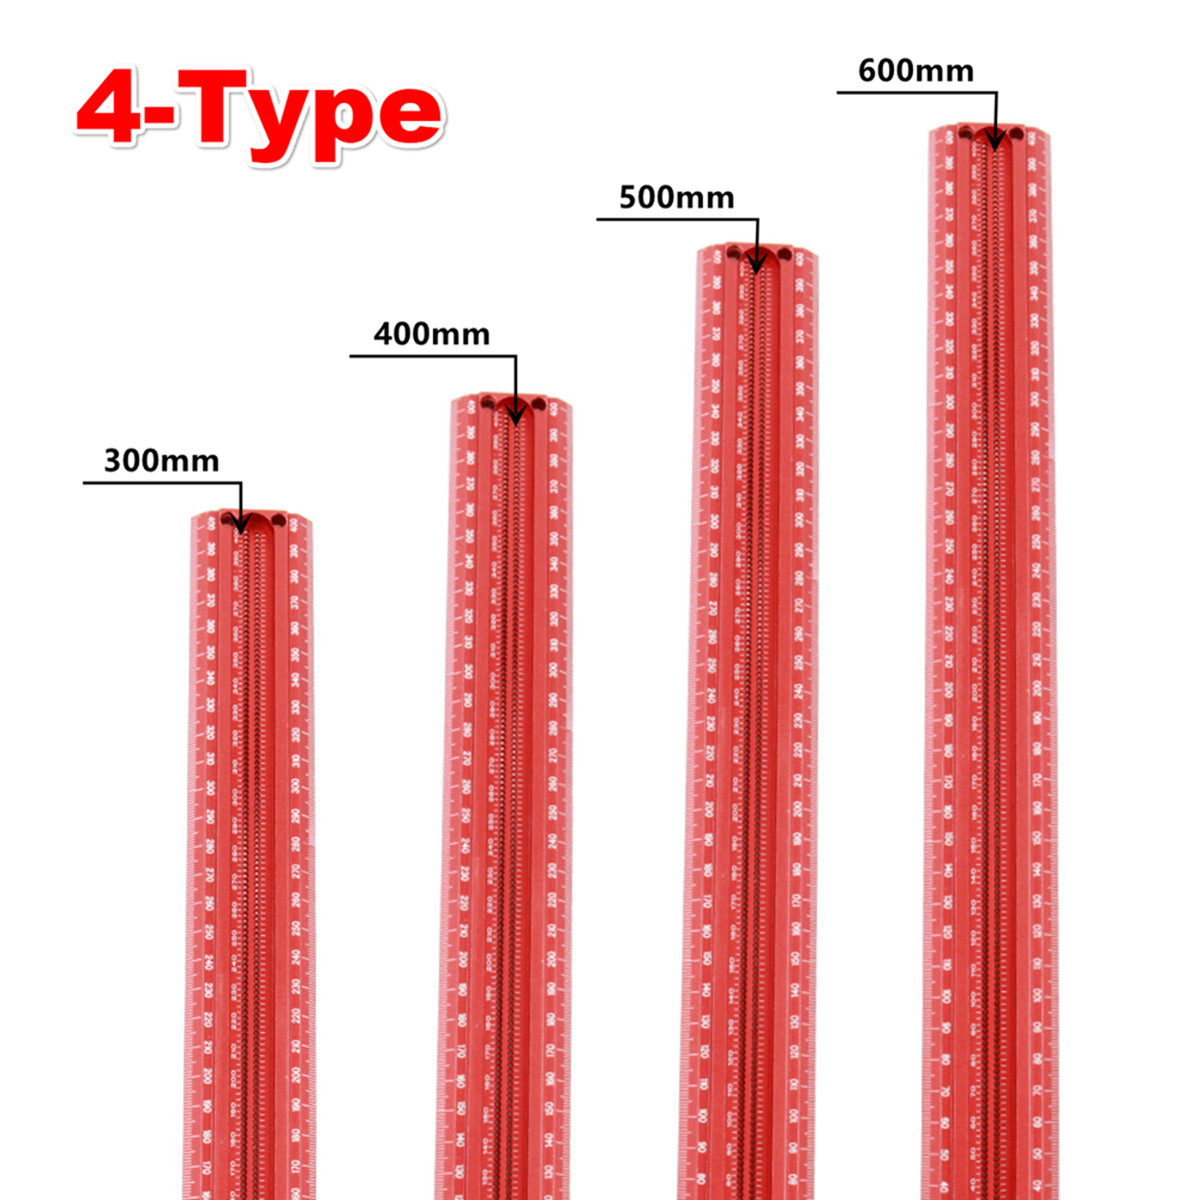 Drillpro-300400500600mm-Woodworking-Line-Scriber-T-type-Ruler-1mm-Hole-Crossed-Ruler-Aluminum-Alloy--1772764-5